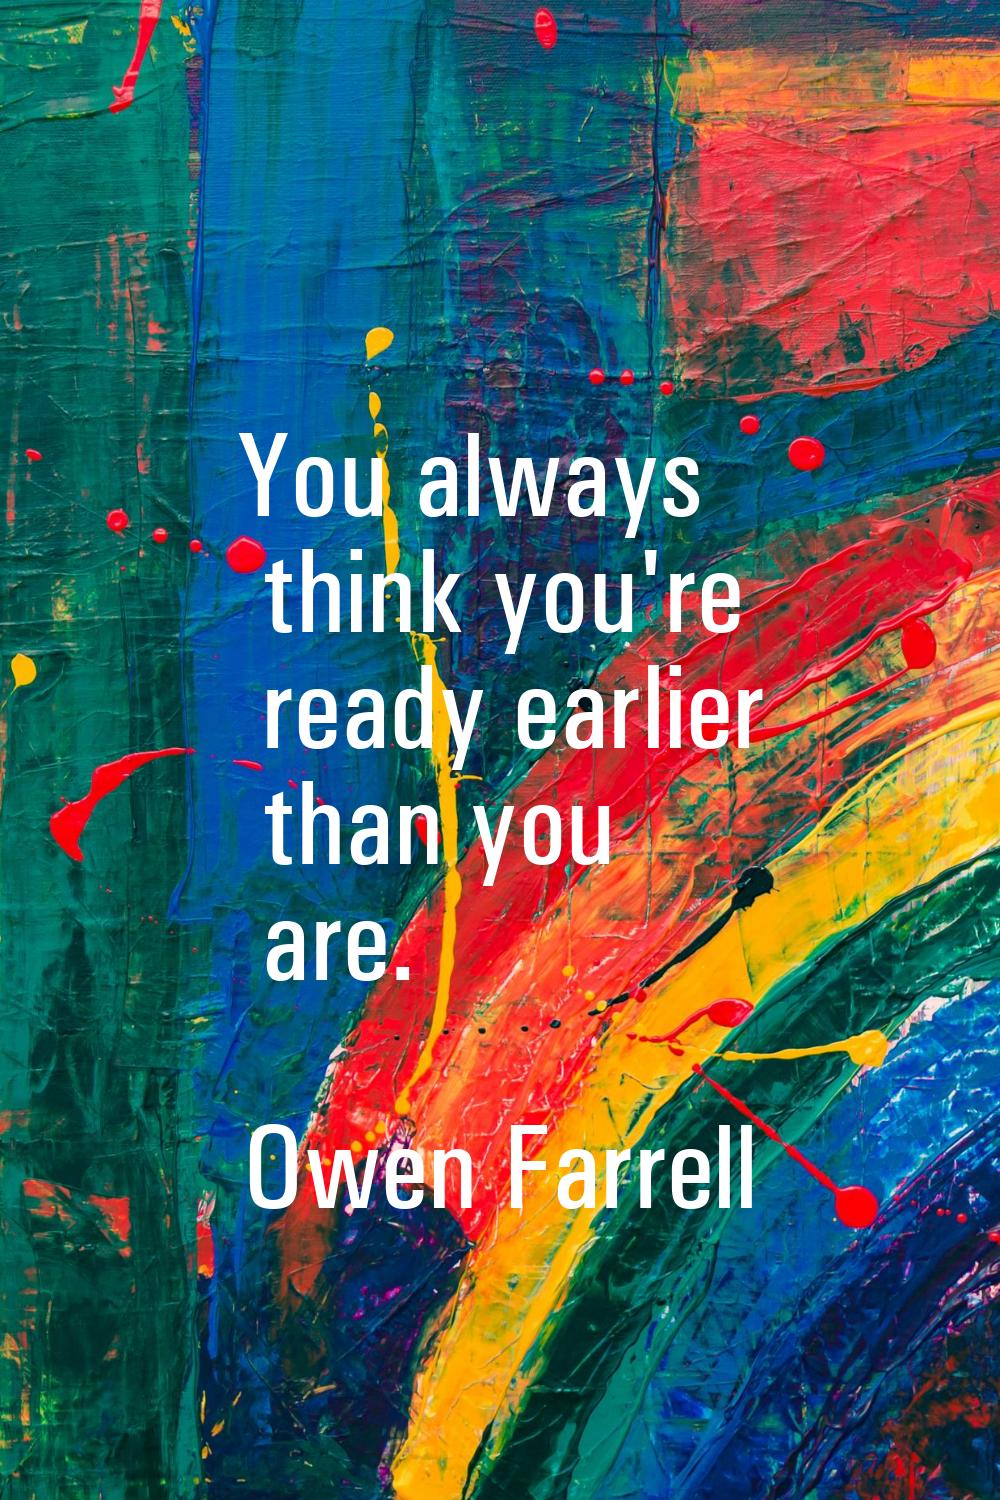 You always think you're ready earlier than you are.